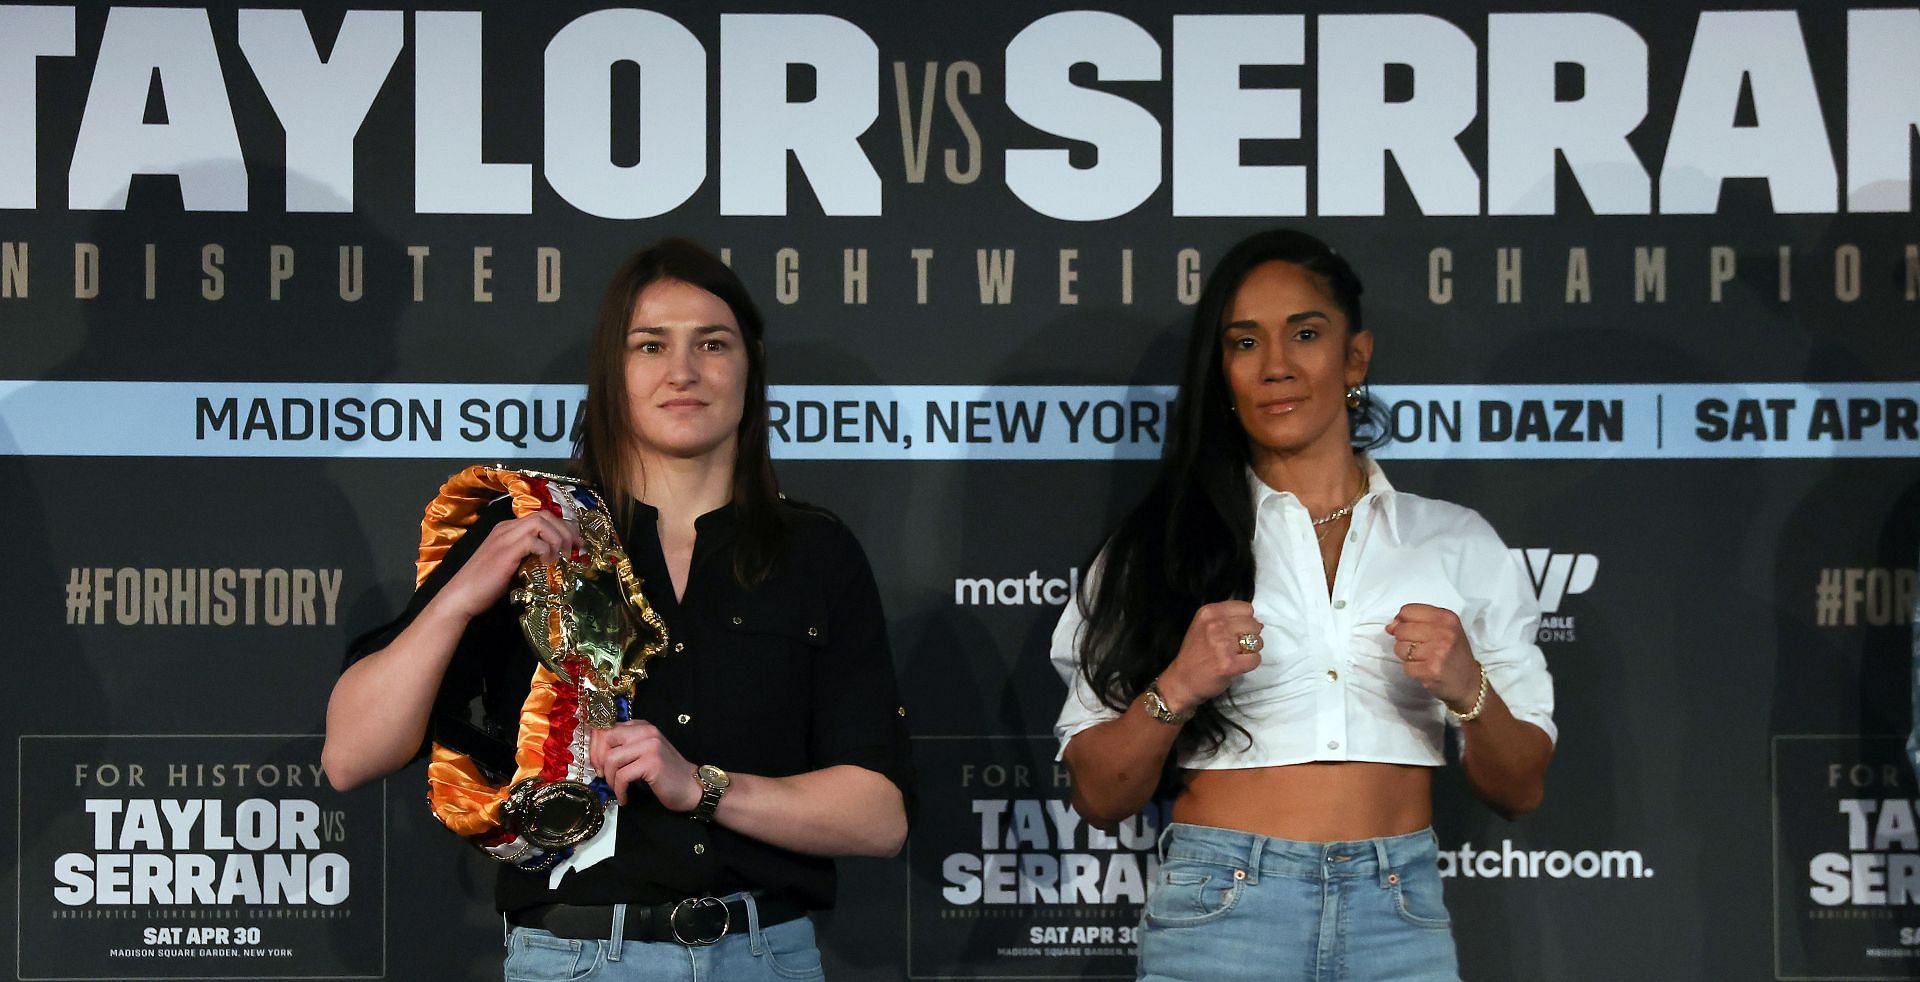 Katie Taylor (L) and Amanda Serrano (R) have received support from the WWE ahead of their clash.